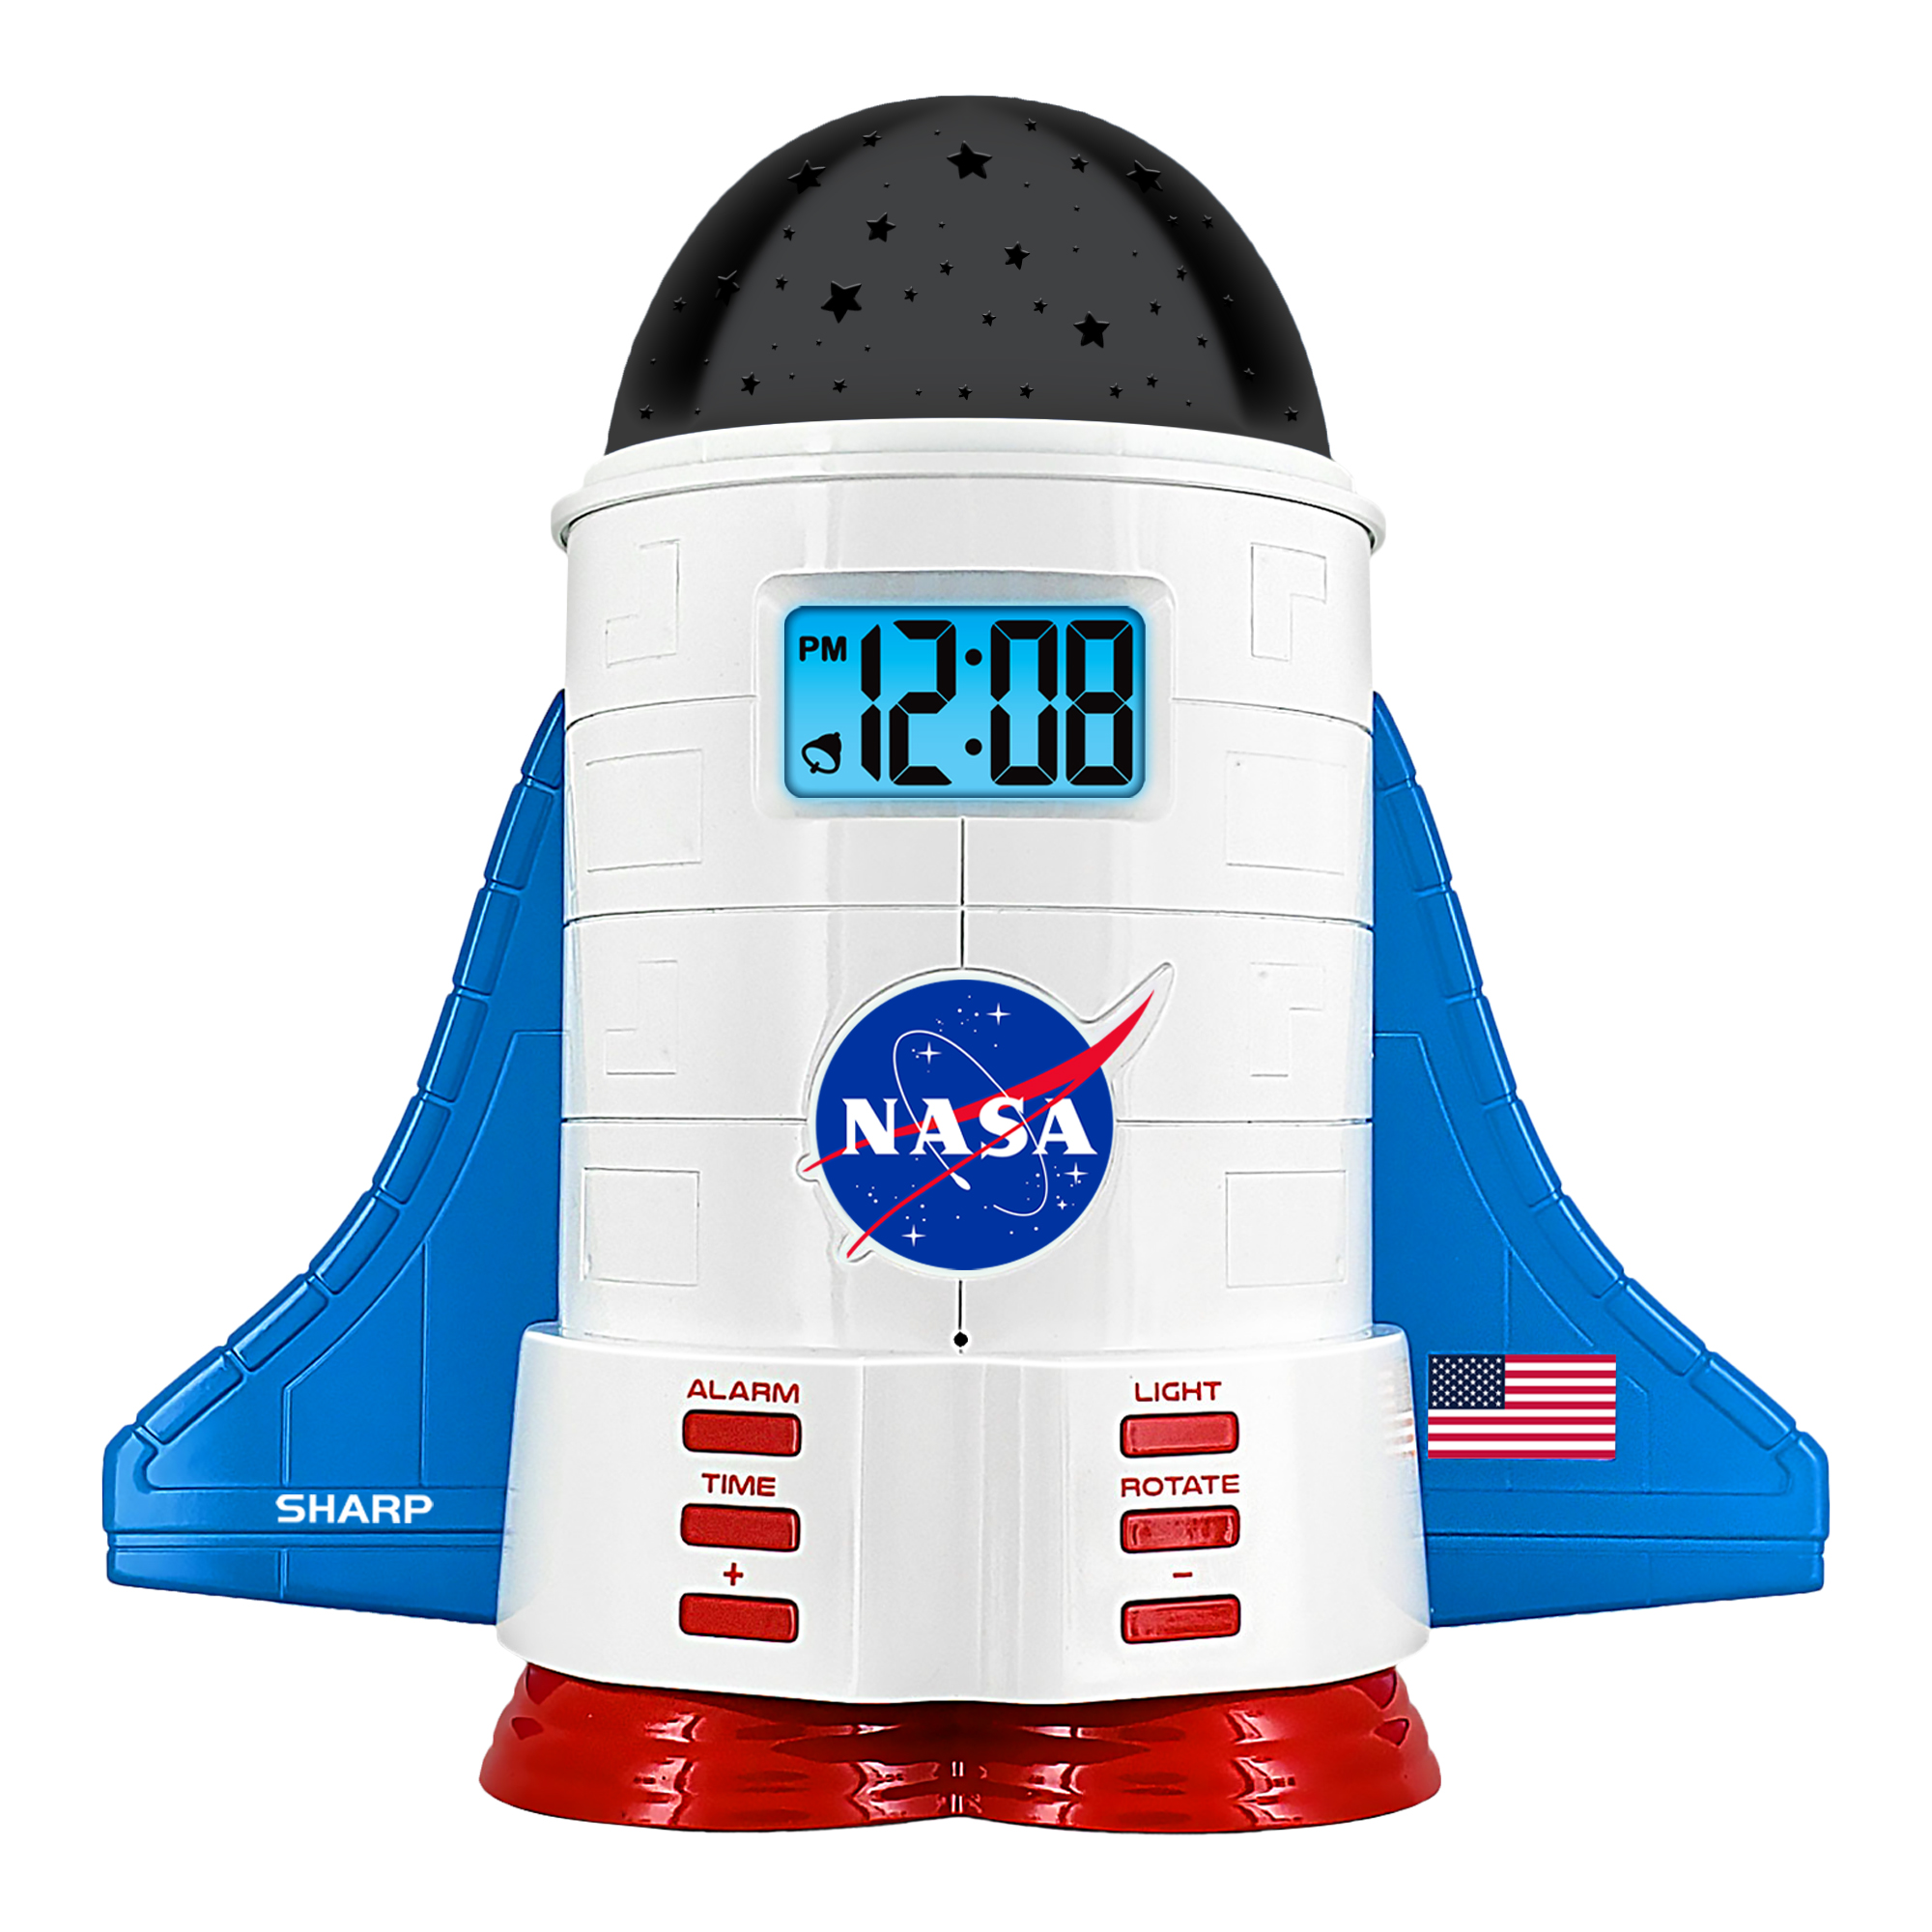 Sharp NASA Space Shuttle Night Light LCD Clock, Nightlight with 4 Color Options, 2 Space Themes - image 1 of 8